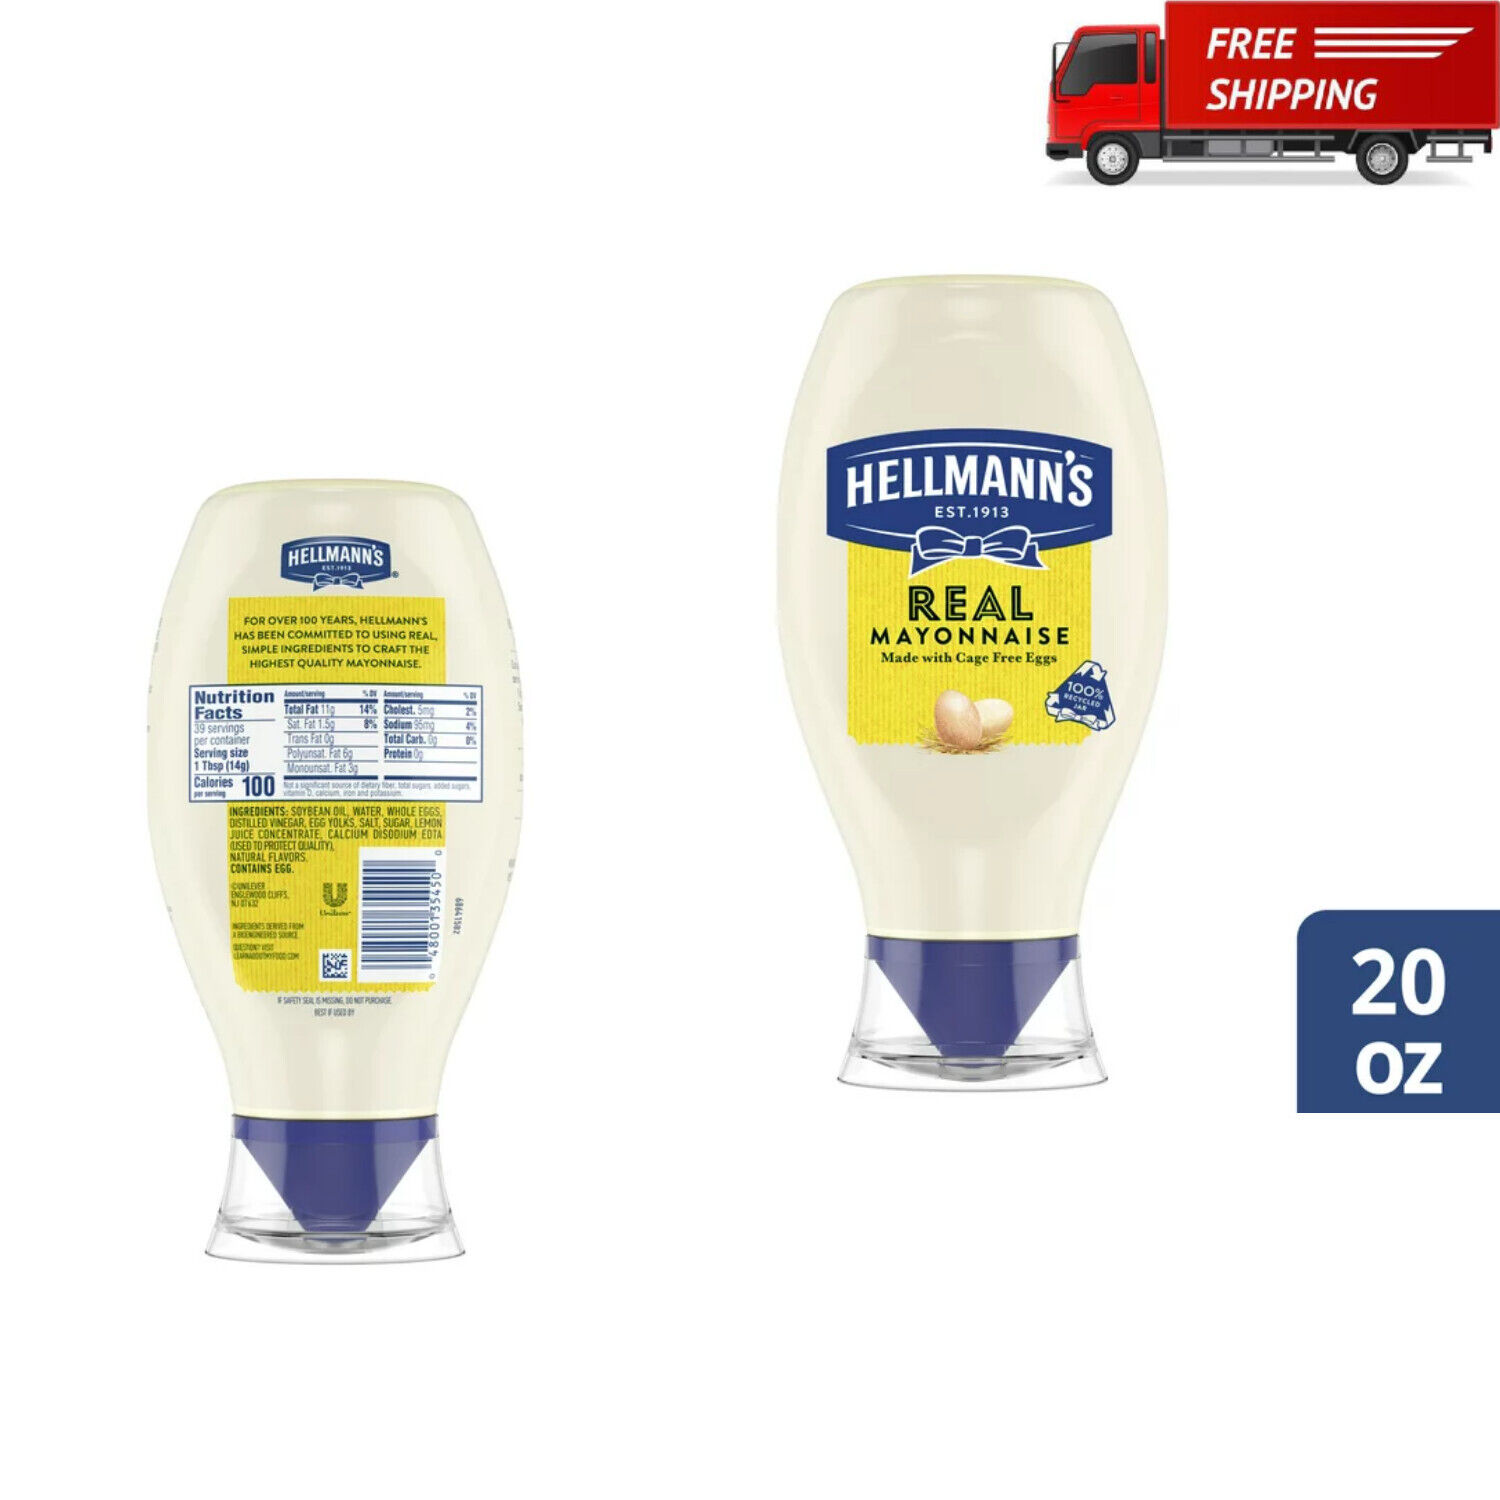 Hellmann's Real Mayonnaise Gluten Free, Made With 100% Cage-free Eggs 20 Oz